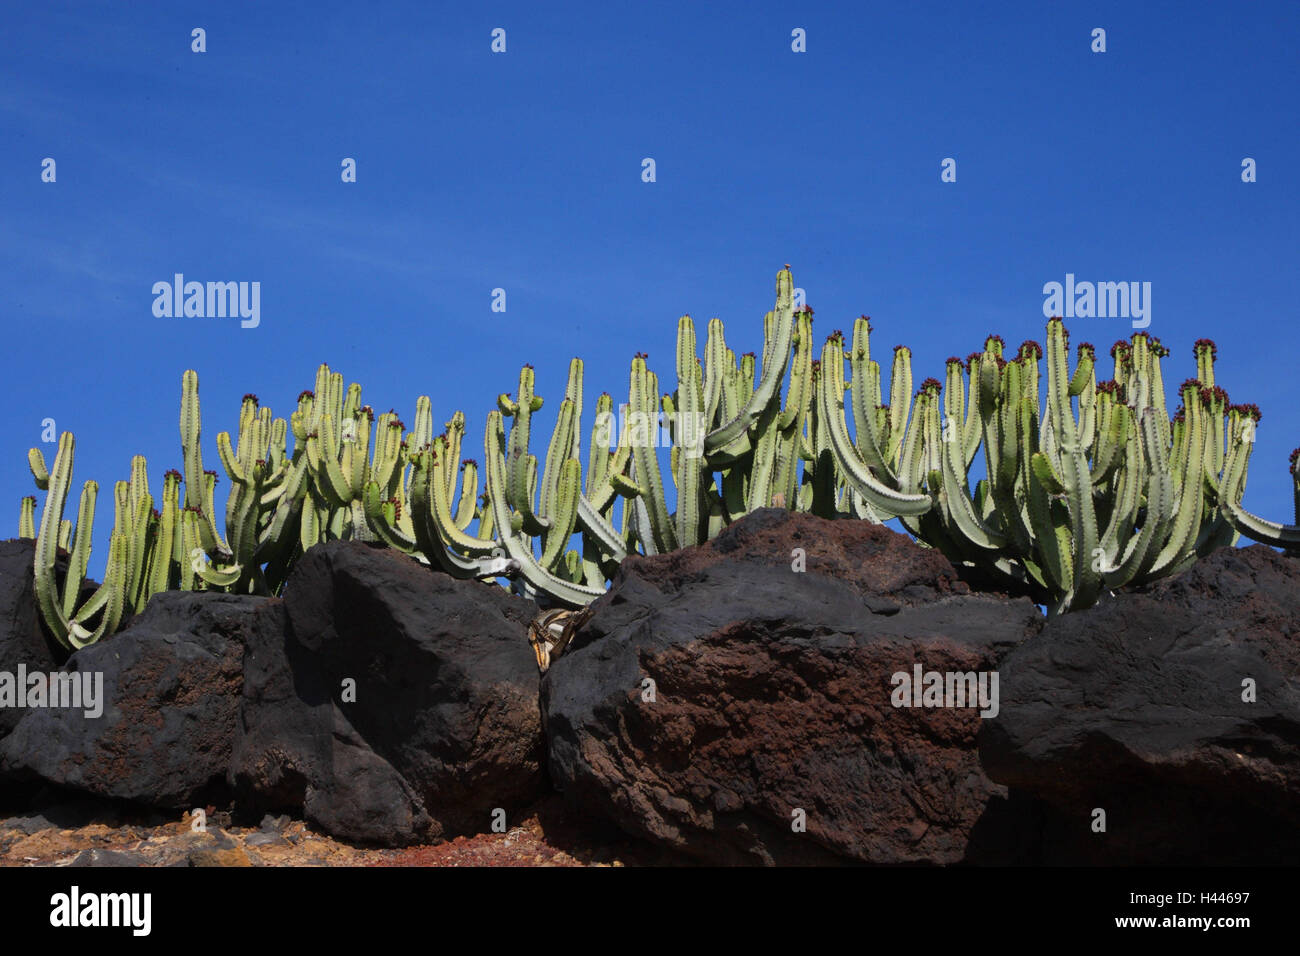 Spain, the Canaries, Lanzarote, lava rock, Canaries spurge, Stock Photo